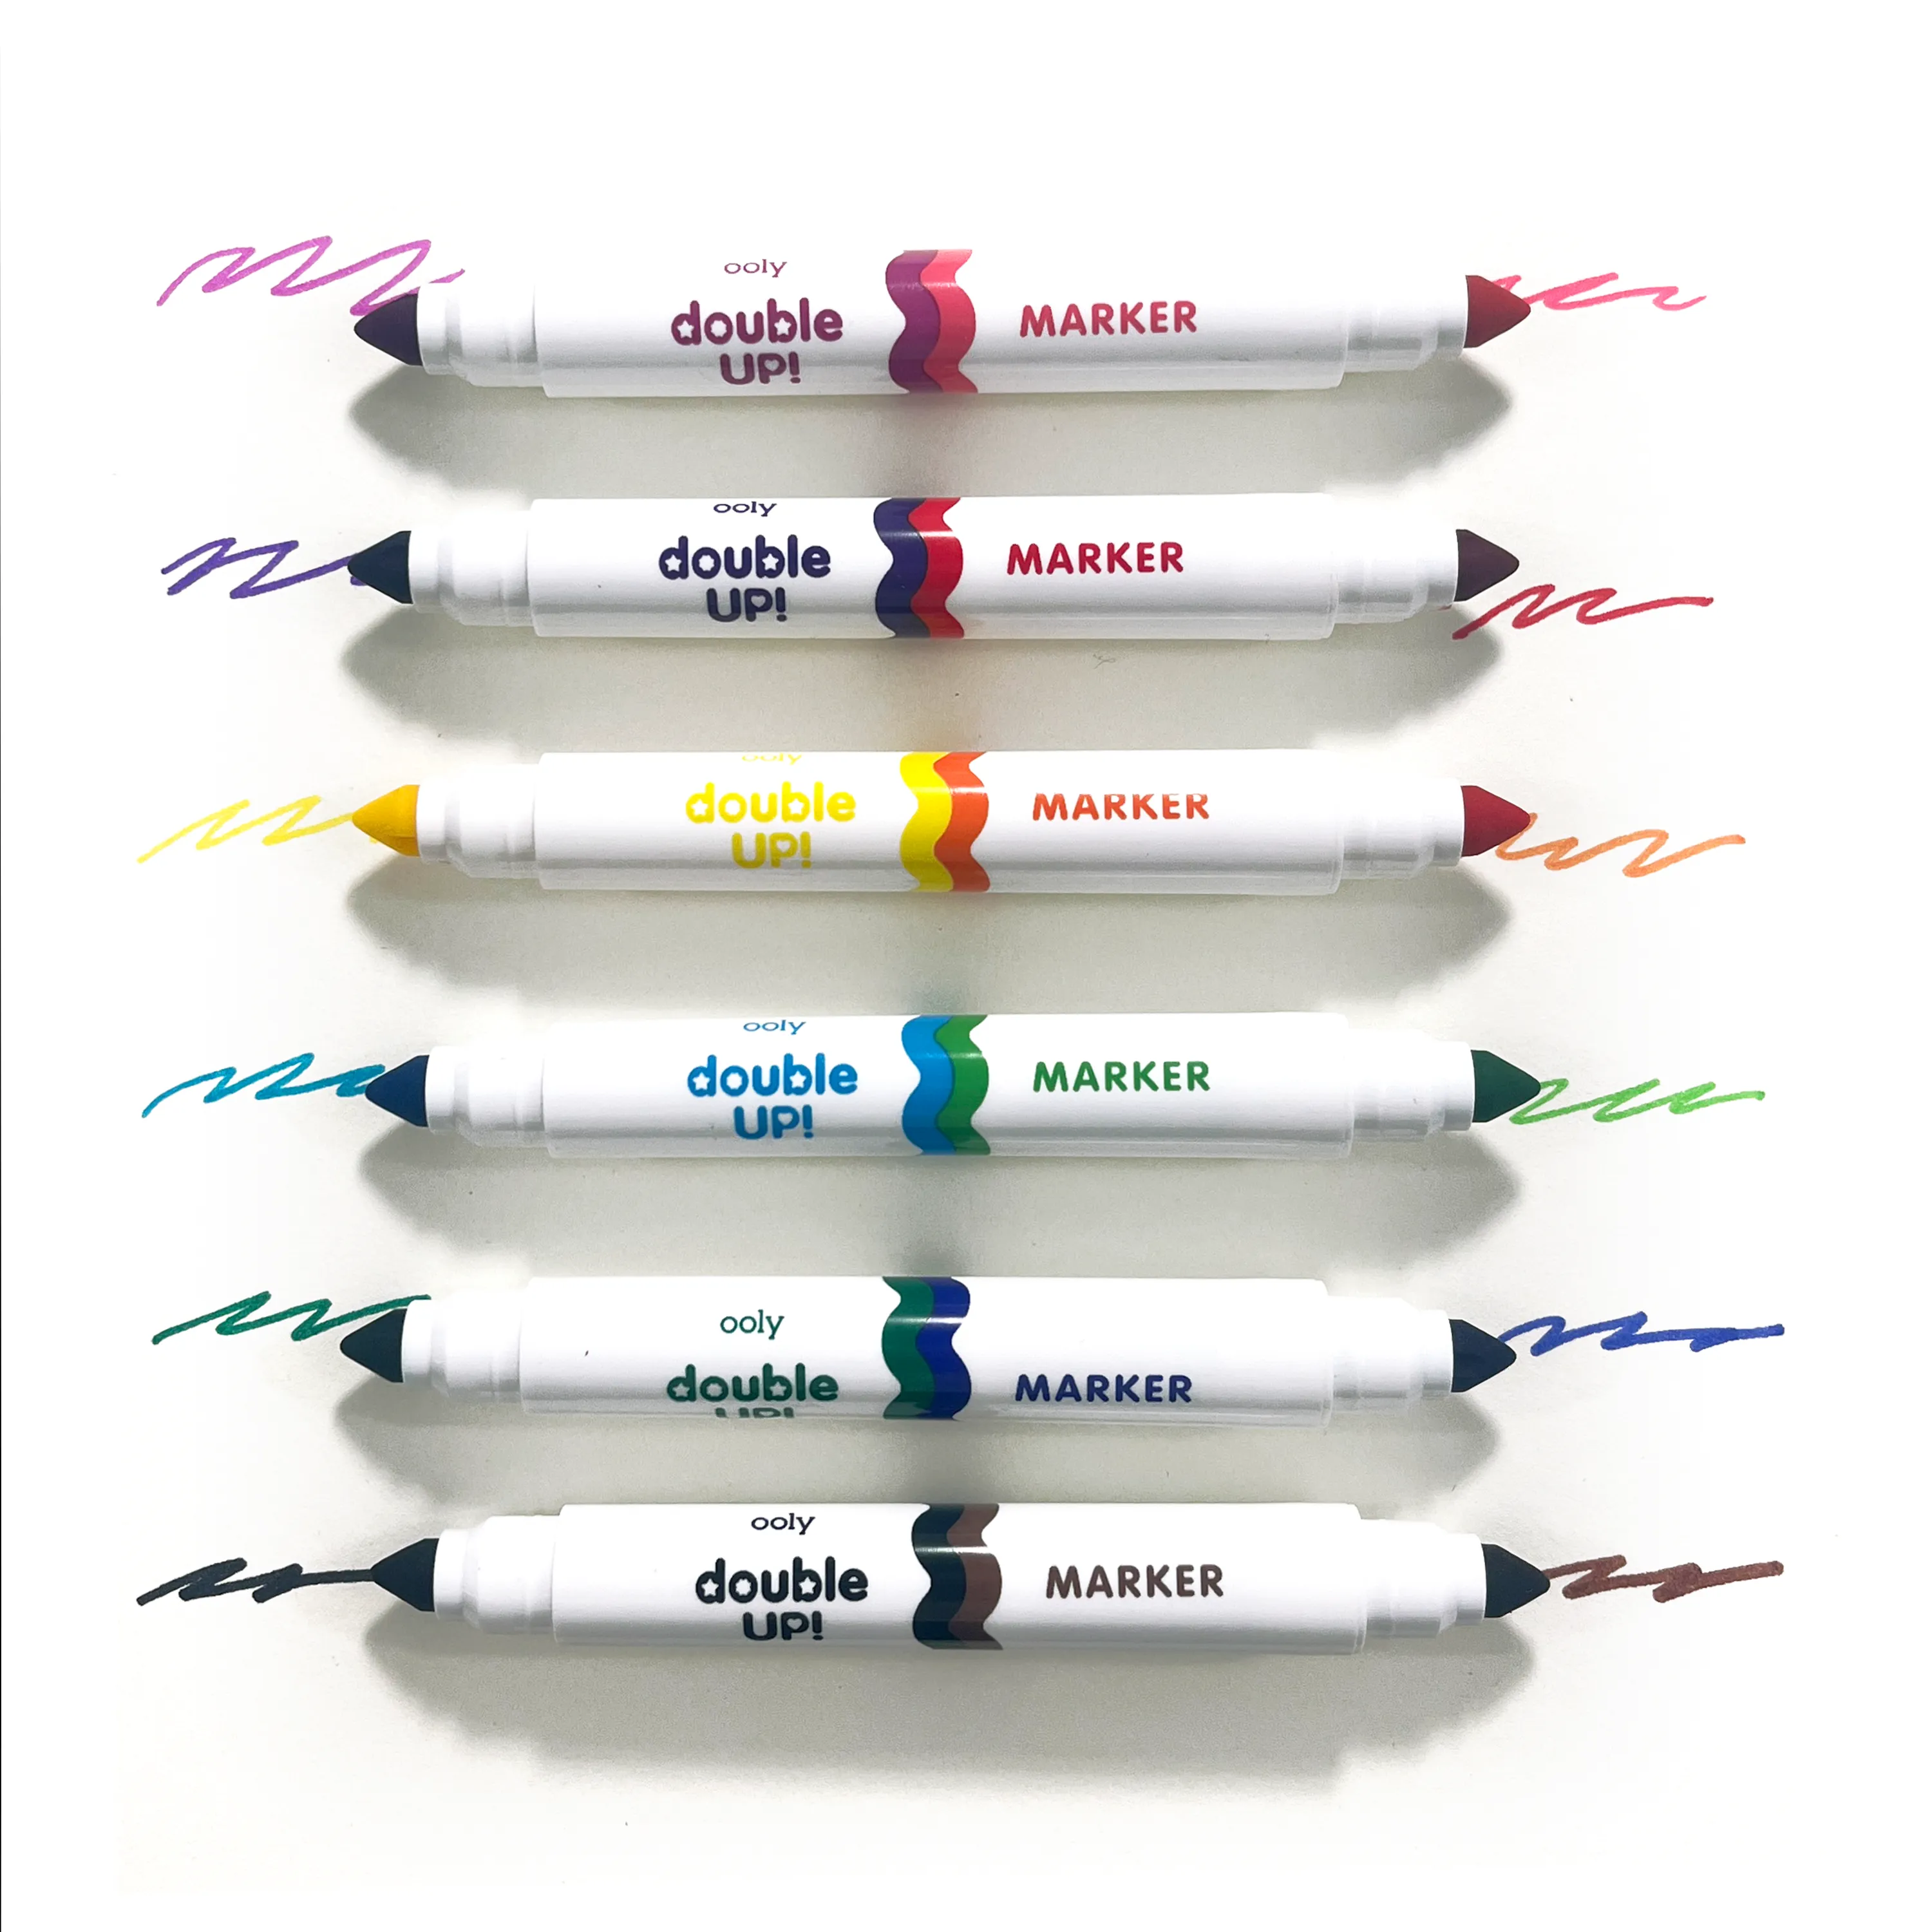 Double Up! Double-Ended Markers out of packaging with swatches